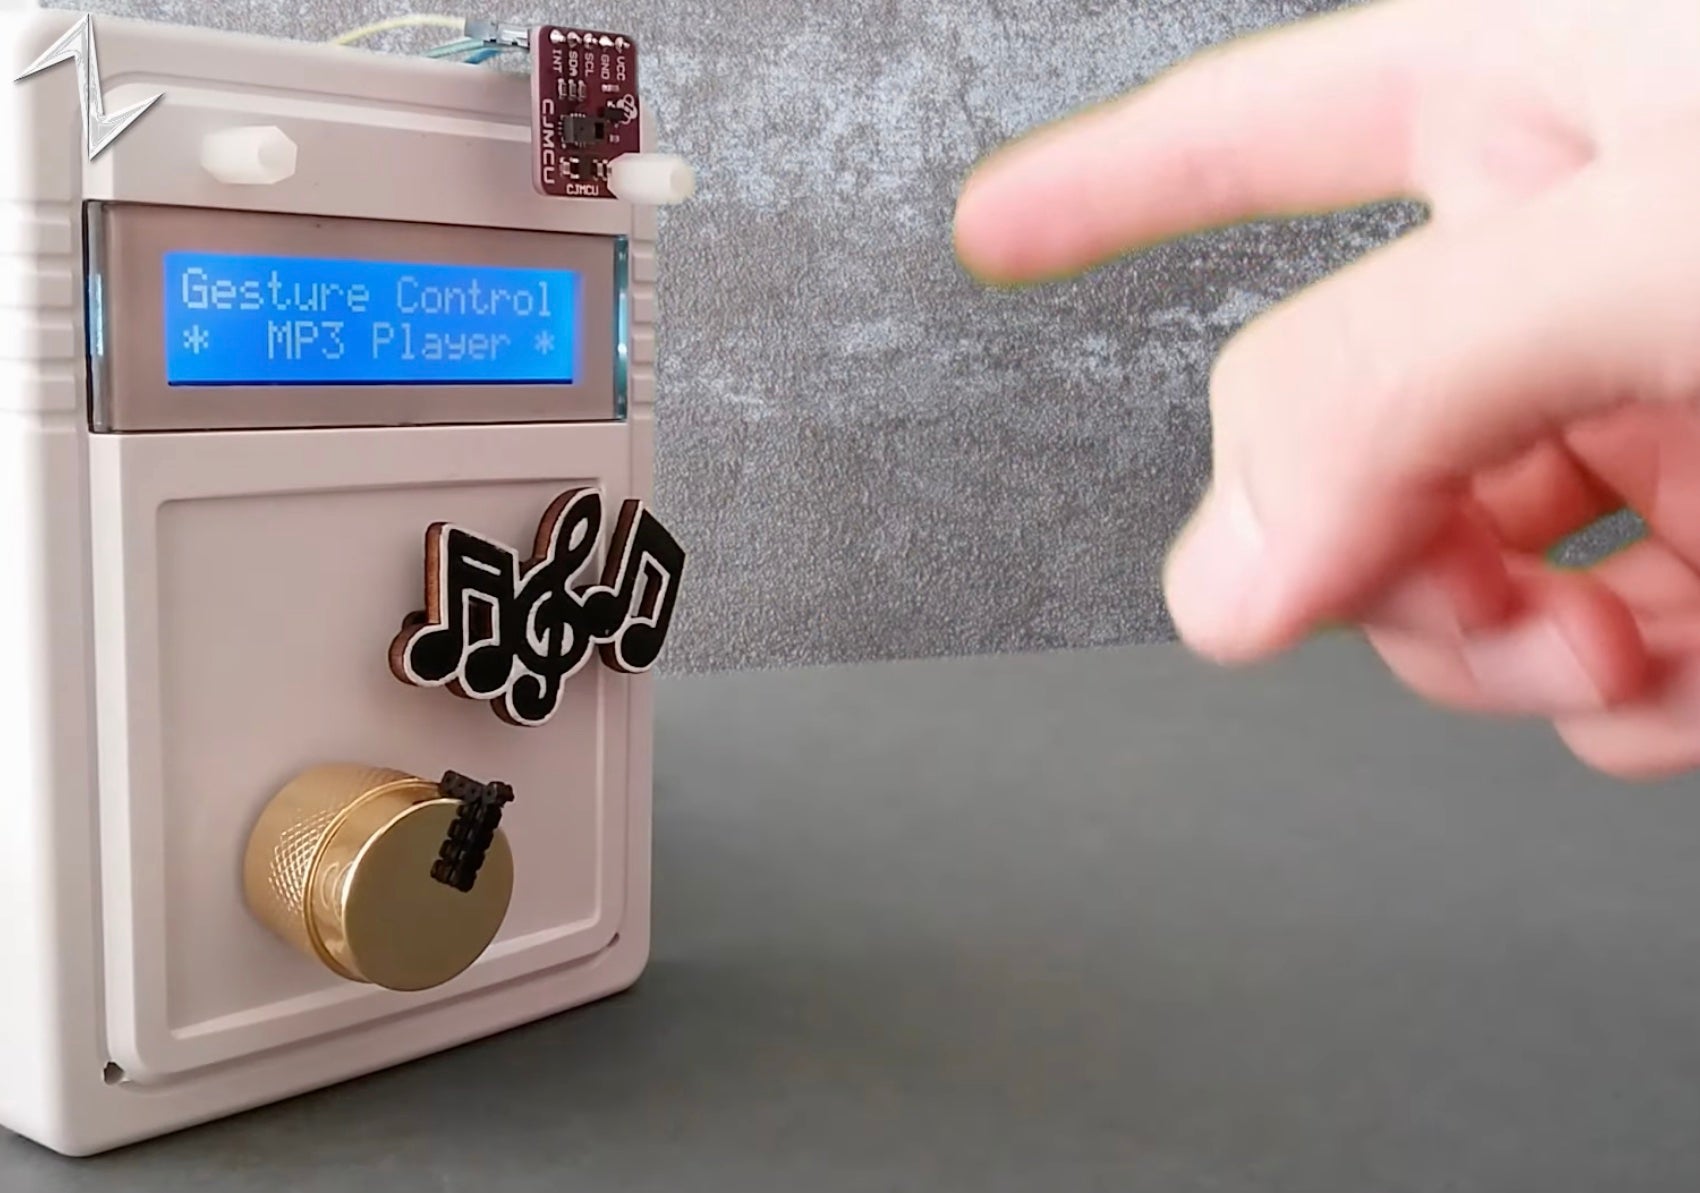 This MP3 player is controlled with a twirl of your finger and wave of your hand